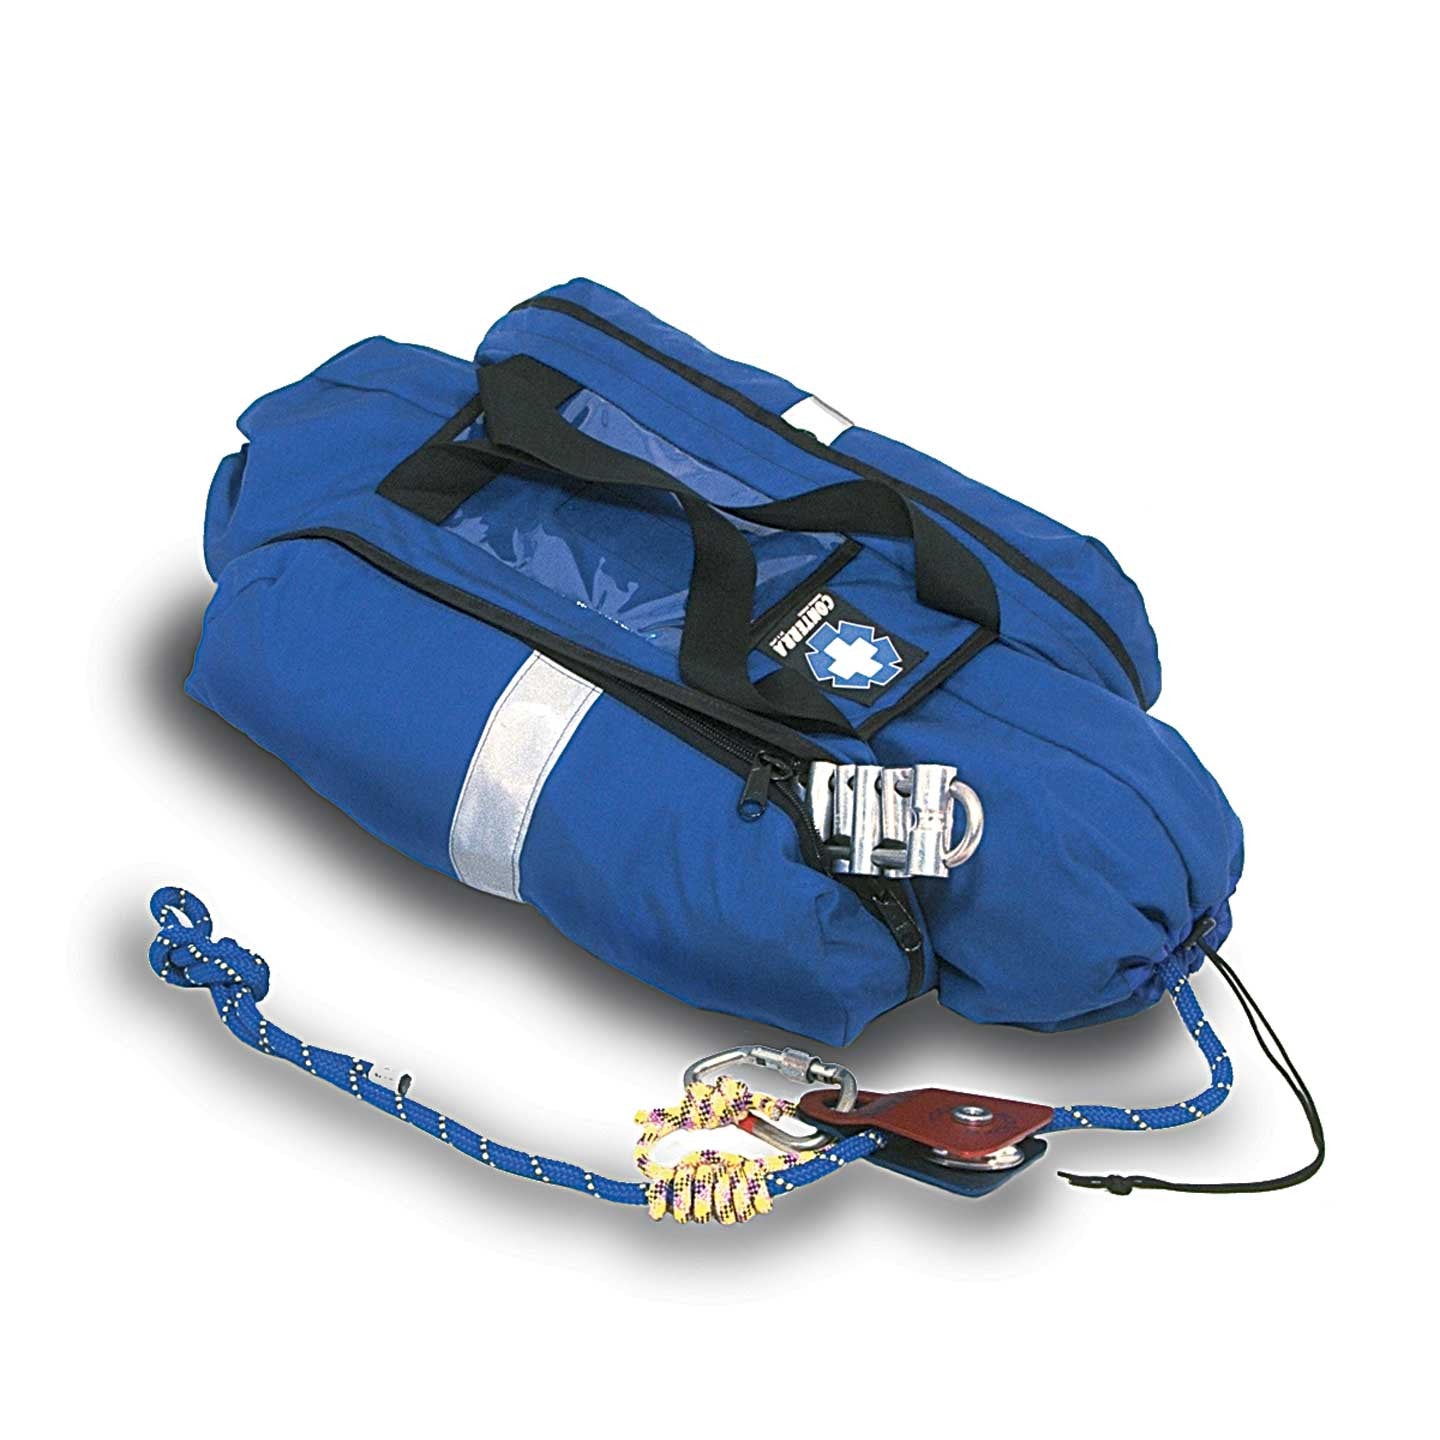 Rescue Throw Rope Bag with 100ft Floating Line, Whistle Buckle for  Kayaking, Boating, High Limb Throwing - Boat& Kayak Emergency Safty  Accessories - Walmart.com